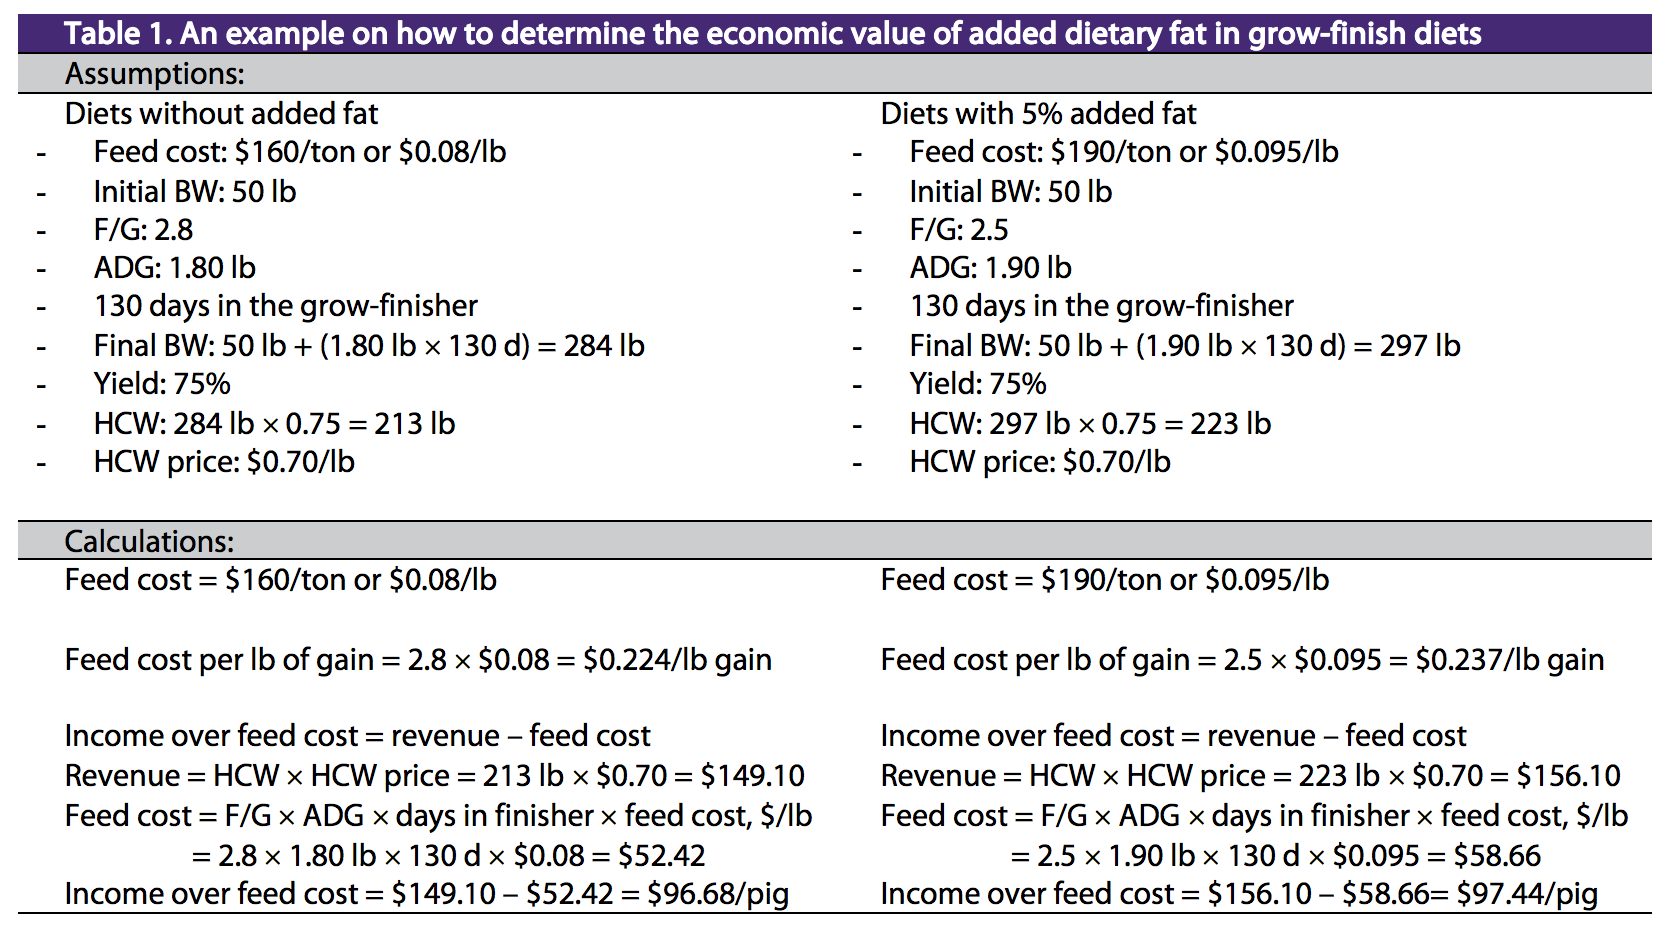 Example of economics of added dietary fat